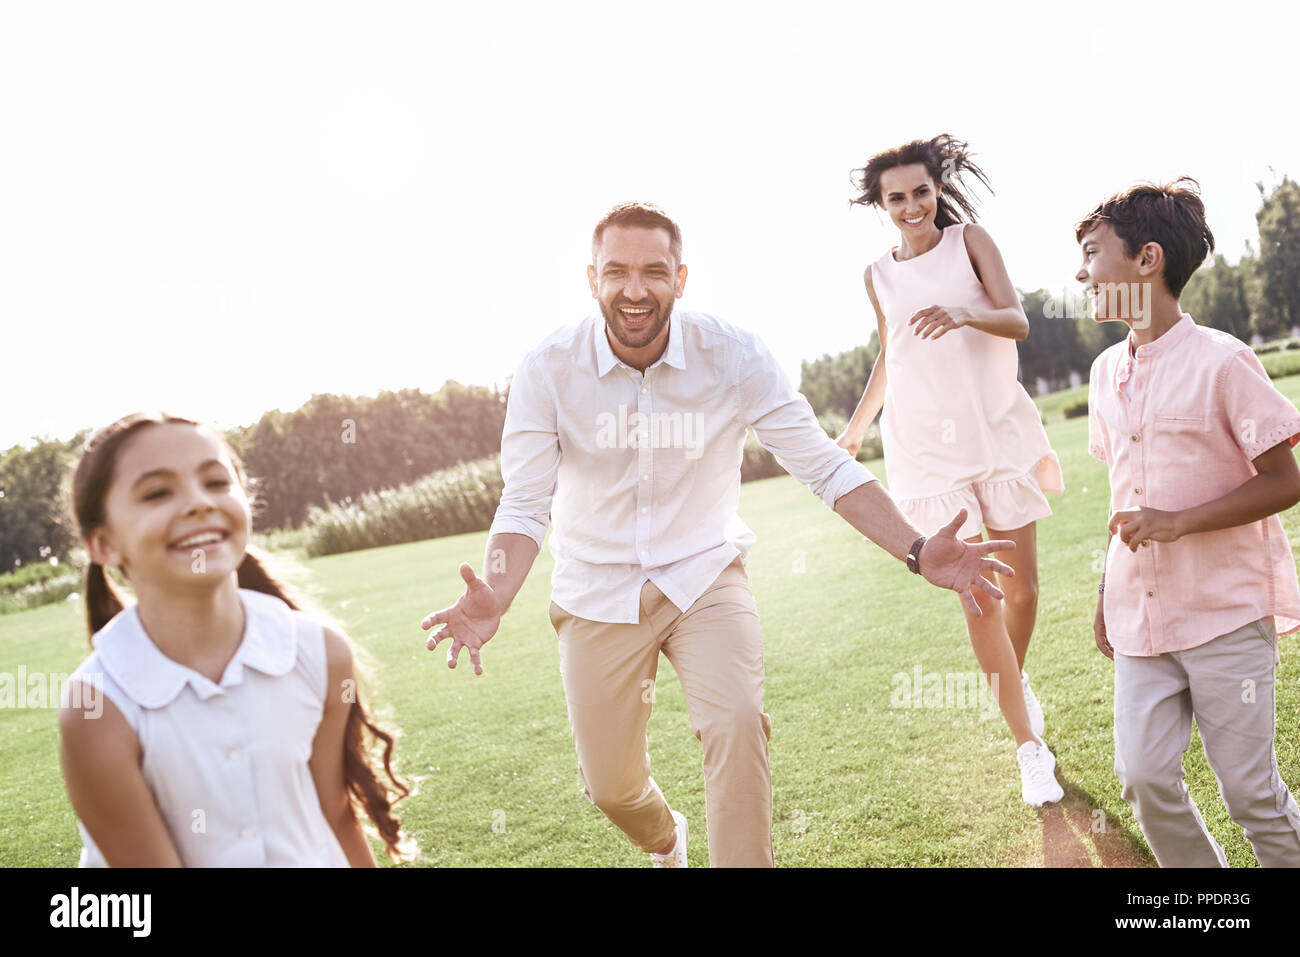 Bonding. Family of four running on grassy field playing playing  Stock Photo